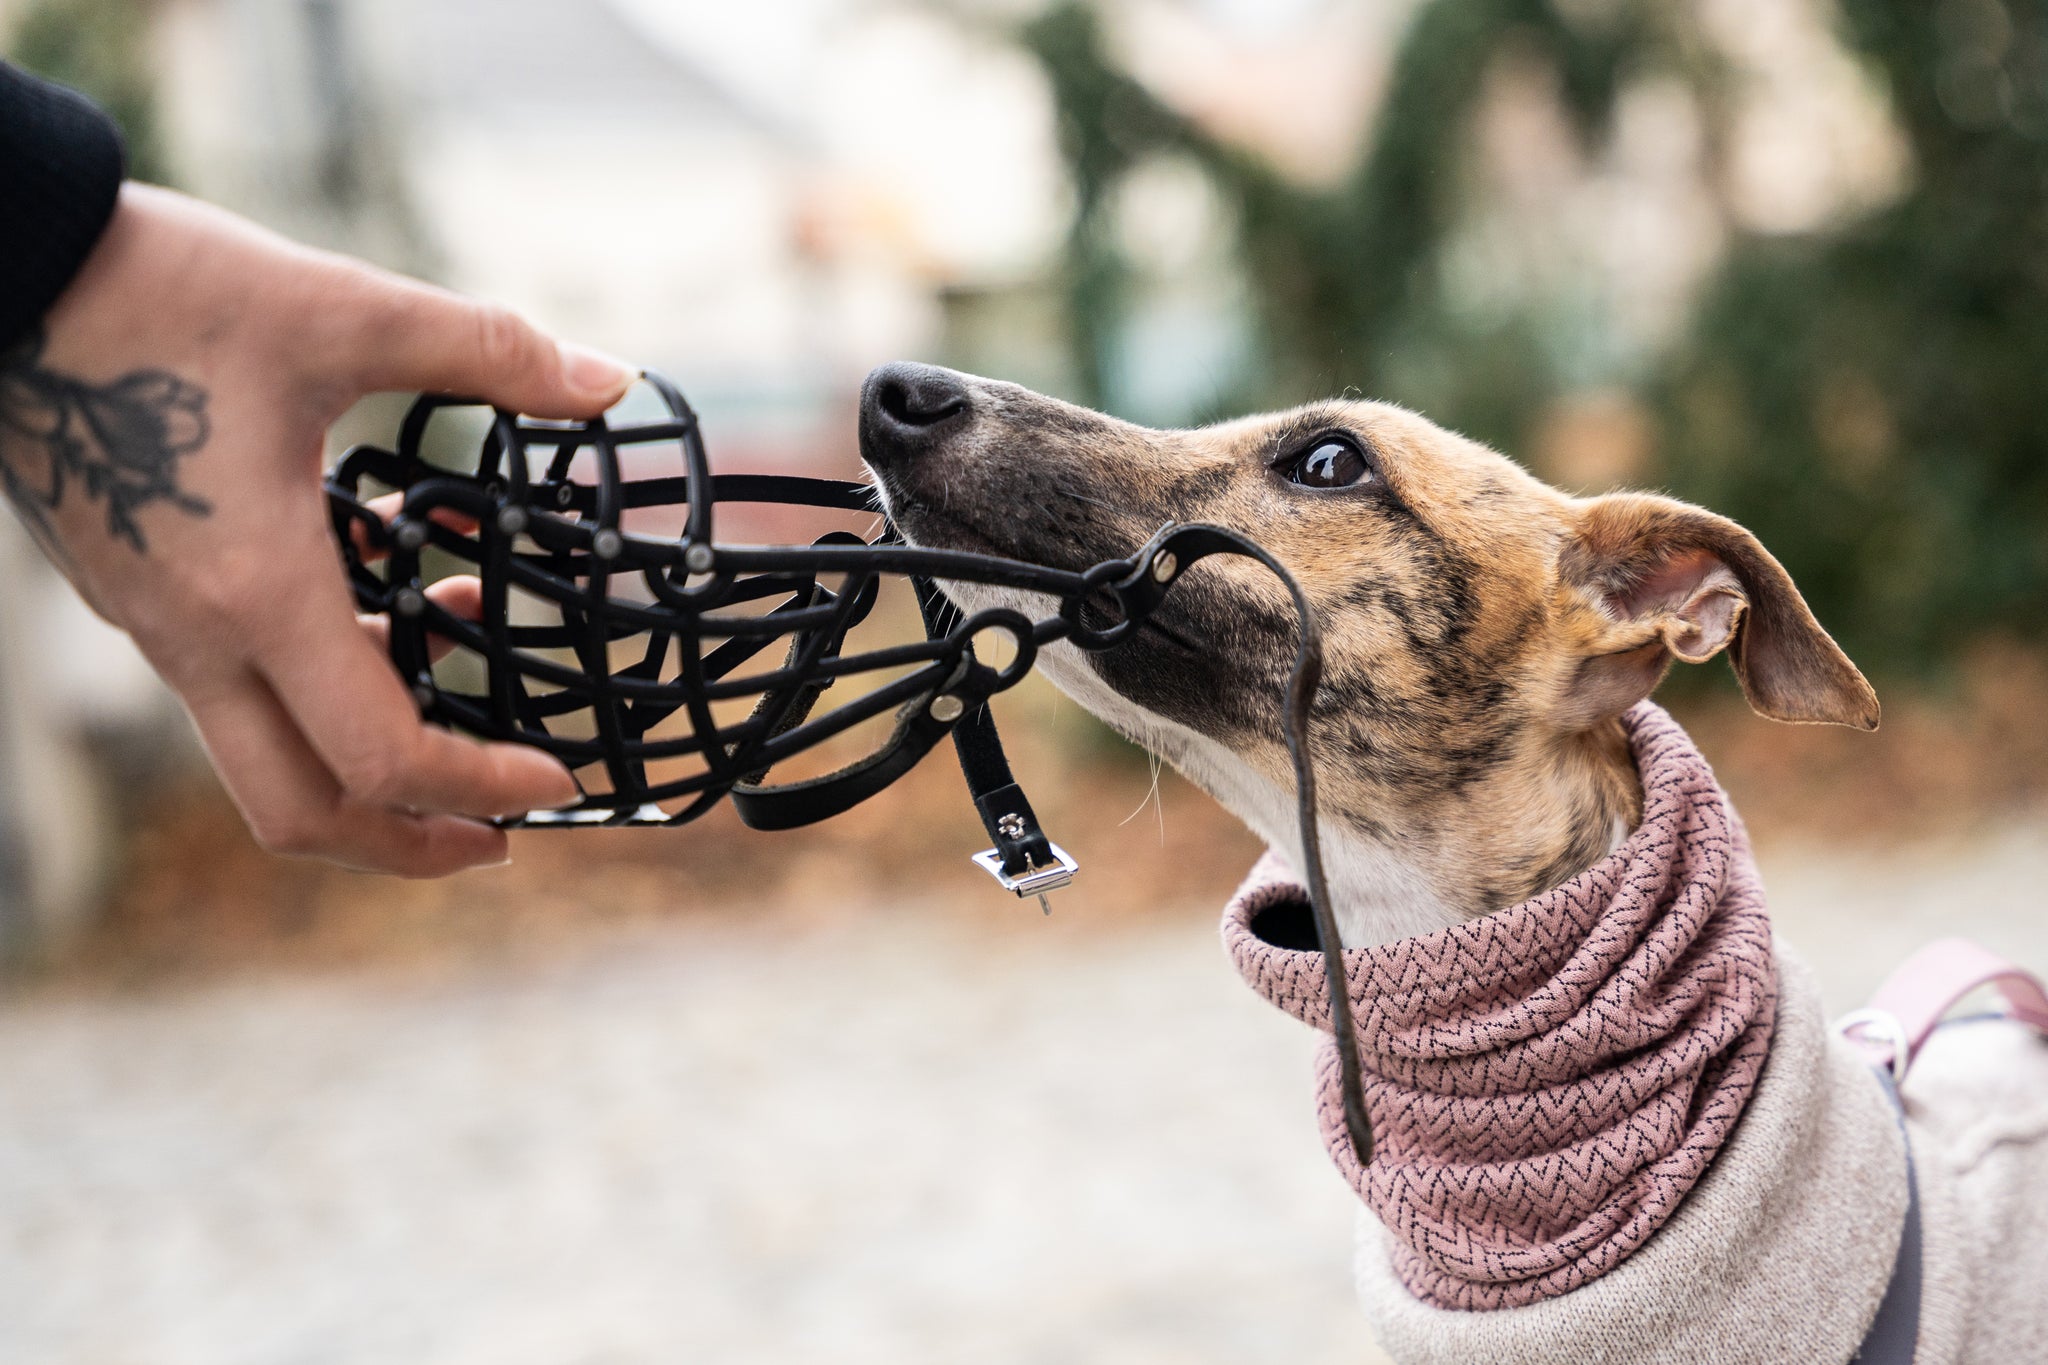 This photo shows a dog with a muzzle. It is part of the blog post 'A Plea for the Muzzle'. The collar and leash are from PAWSOME dog accessories.